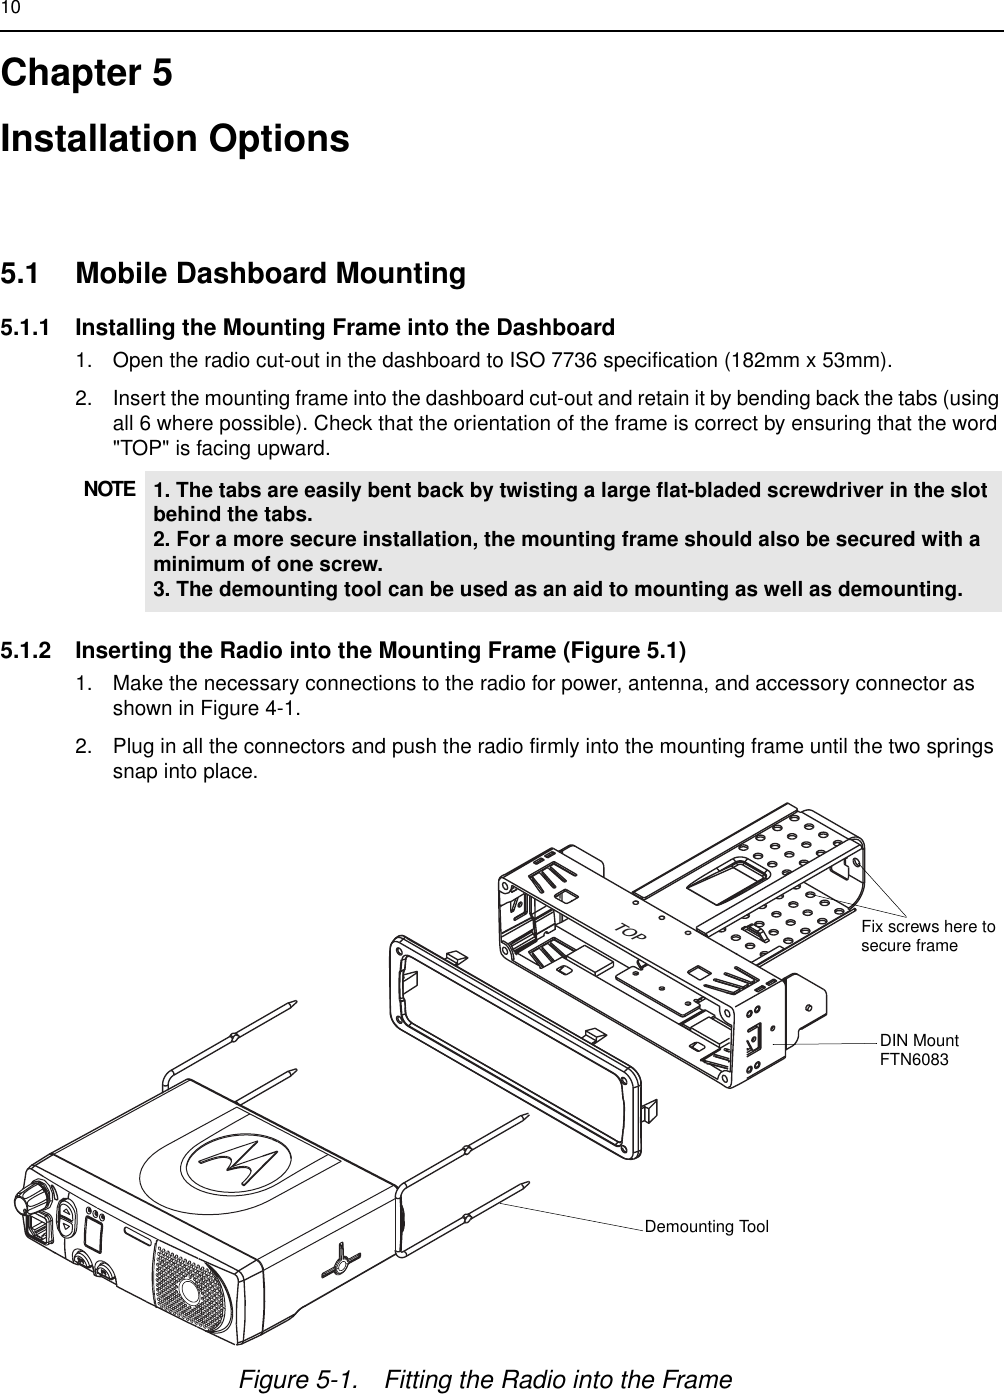 10Chapter 5Installation Options 5.1 Mobile Dashboard Mounting5.1.1 Installing the Mounting Frame into the Dashboard1. Open the radio cut-out in the dashboard to ISO 7736 specification (182mm x 53mm).2. Insert the mounting frame into the dashboard cut-out and retain it by bending back the tabs (using all 6 where possible). Check that the orientation of the frame is correct by ensuring that the word &quot;TOP&quot; is facing upward. 5.1.2 Inserting the Radio into the Mounting Frame (Figure 5.1)1. Make the necessary connections to the radio for power, antenna, and accessory connector as shown in Figure 4-1.2. Plug in all the connectors and push the radio firmly into the mounting frame until the two springs snap into place.NOTE 1. The tabs are easily bent back by twisting a large flat-bladed screwdriver in the slot behind the tabs.2. For a more secure installation, the mounting frame should also be secured with a minimum of one screw.3. The demounting tool can be used as an aid to mounting as well as demounting.TOPFigure 5-1. Fitting the Radio into the FrameDemounting ToolDIN MountFTN6083Fix screws here tosecure frame